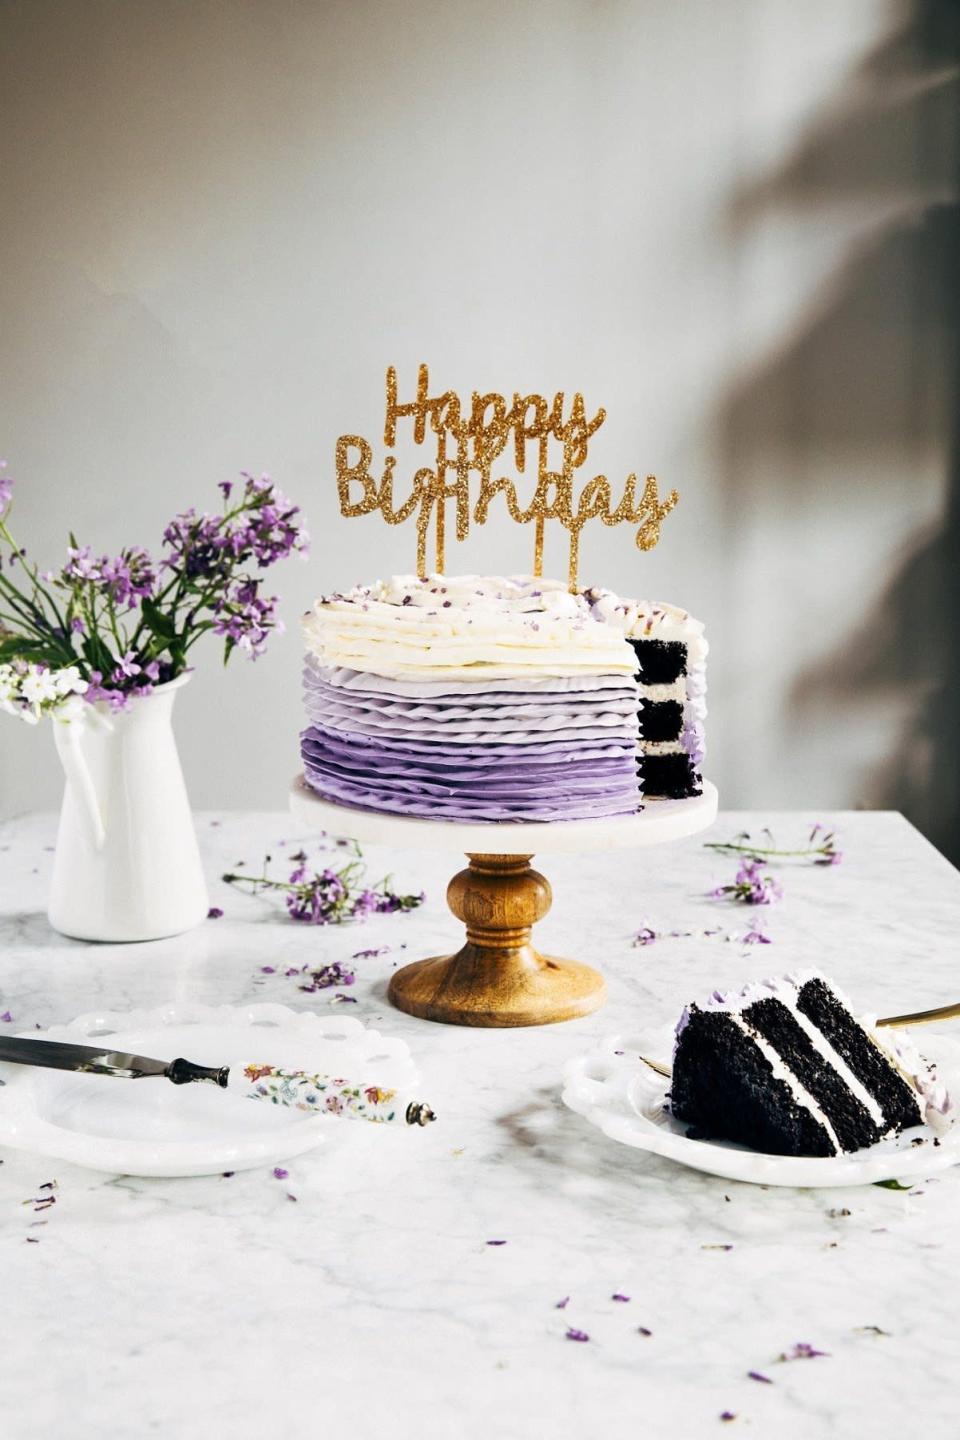 <strong>Get the <a href="http://www.hummingbirdhigh.com/2017/06/30th-birthday-chocolate-cake-with.html" target="_blank">Chocolate Cake With Lavender Ruffled Frosting</a> recipe from Hummingbird High</strong>